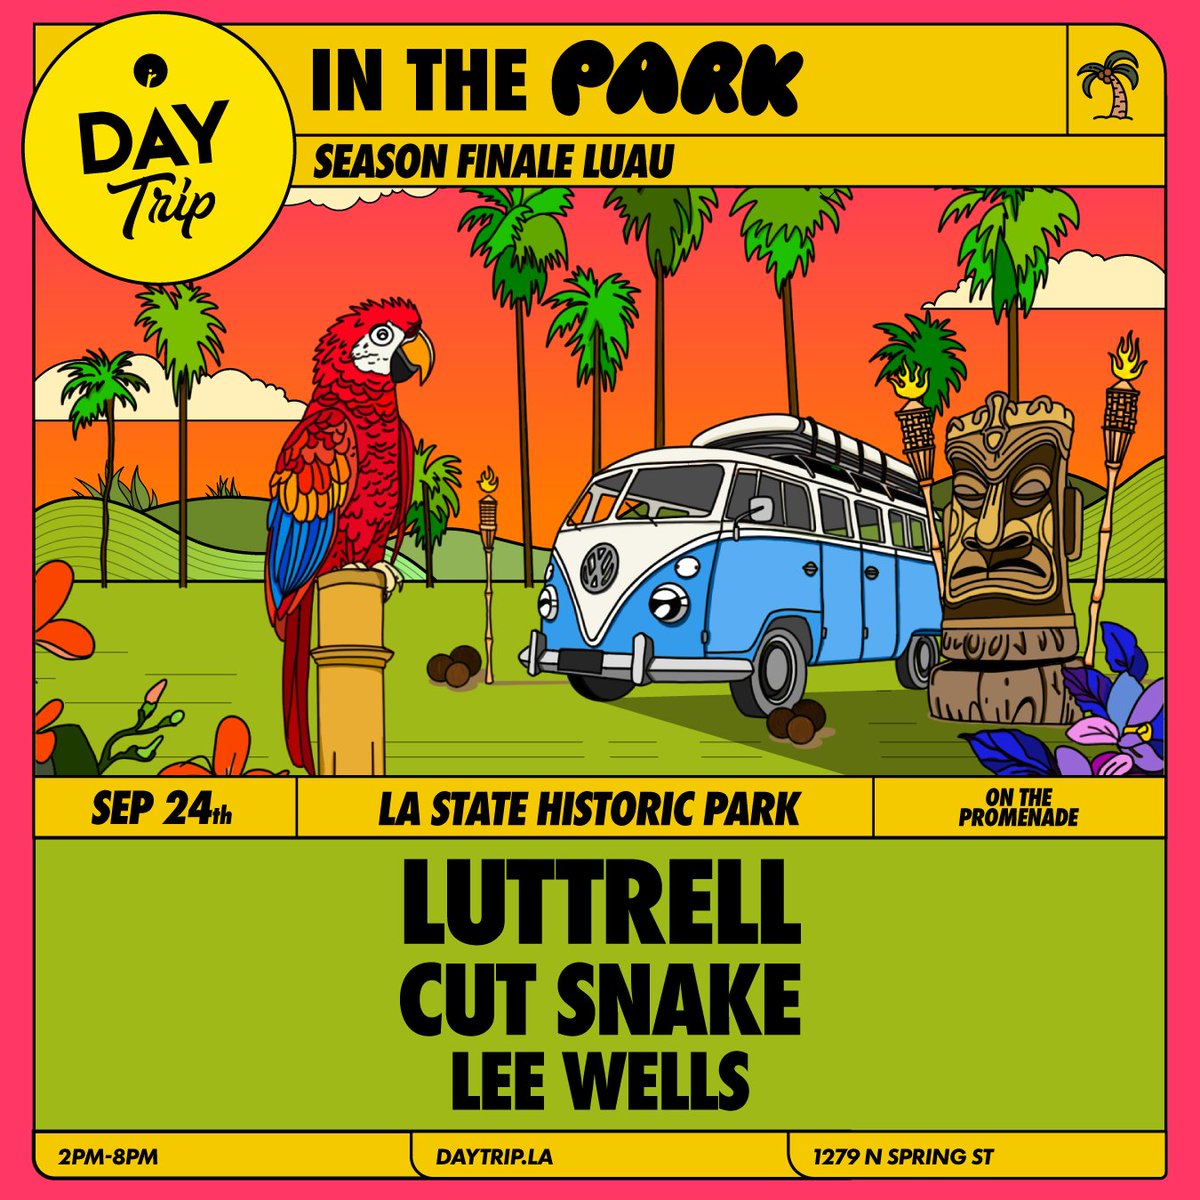 Los Angeles! playing the last Day Trip of the season this Sunday 9/24 at LA State Historic Park w/ @cutsnake and @LeeWellsMusic. let’s close this thing out proper. gonna be classic sunset Luttrell vibes. 🌅 Limited tix left daytrip.la/event/day-trip…